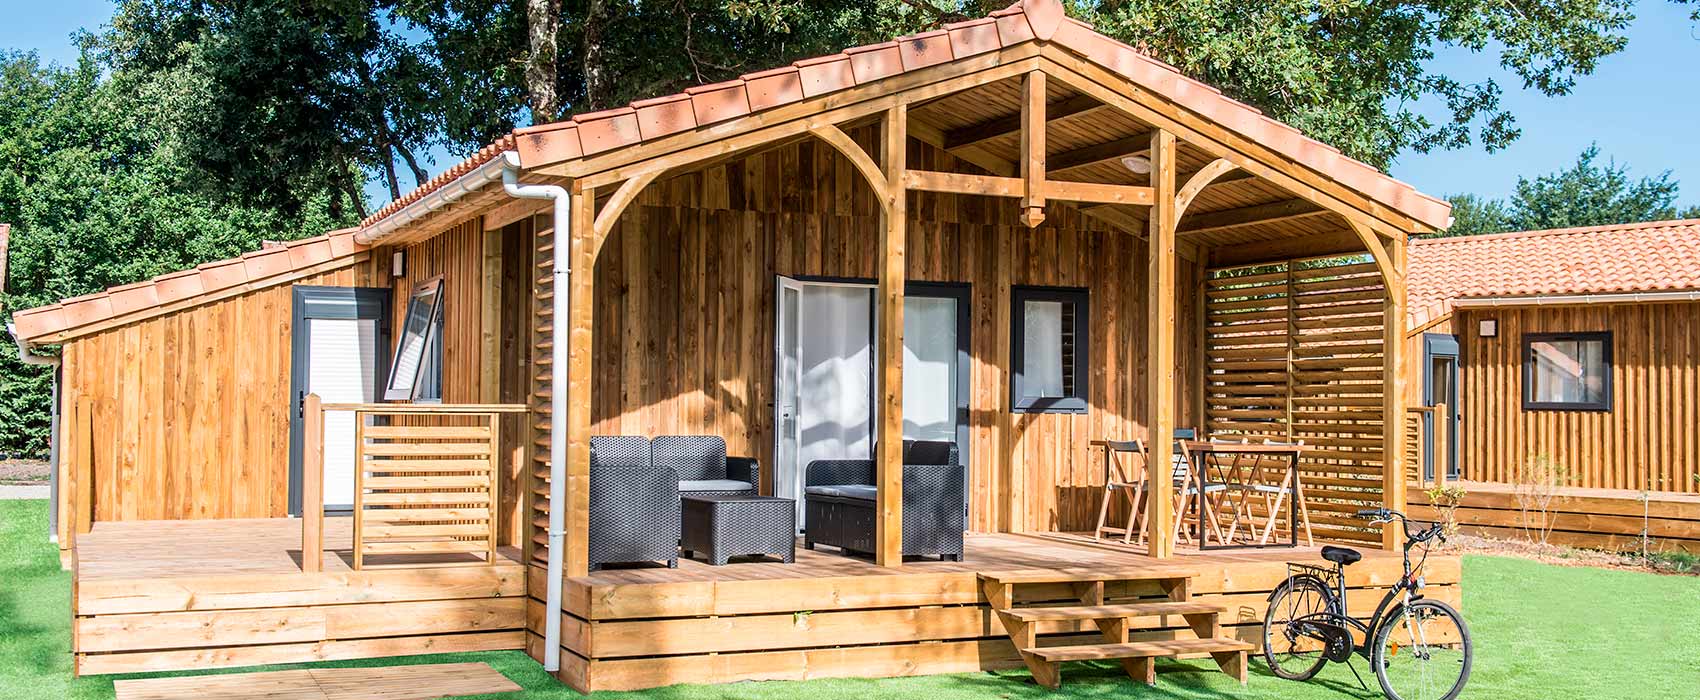 location chalet bois camping arcachon